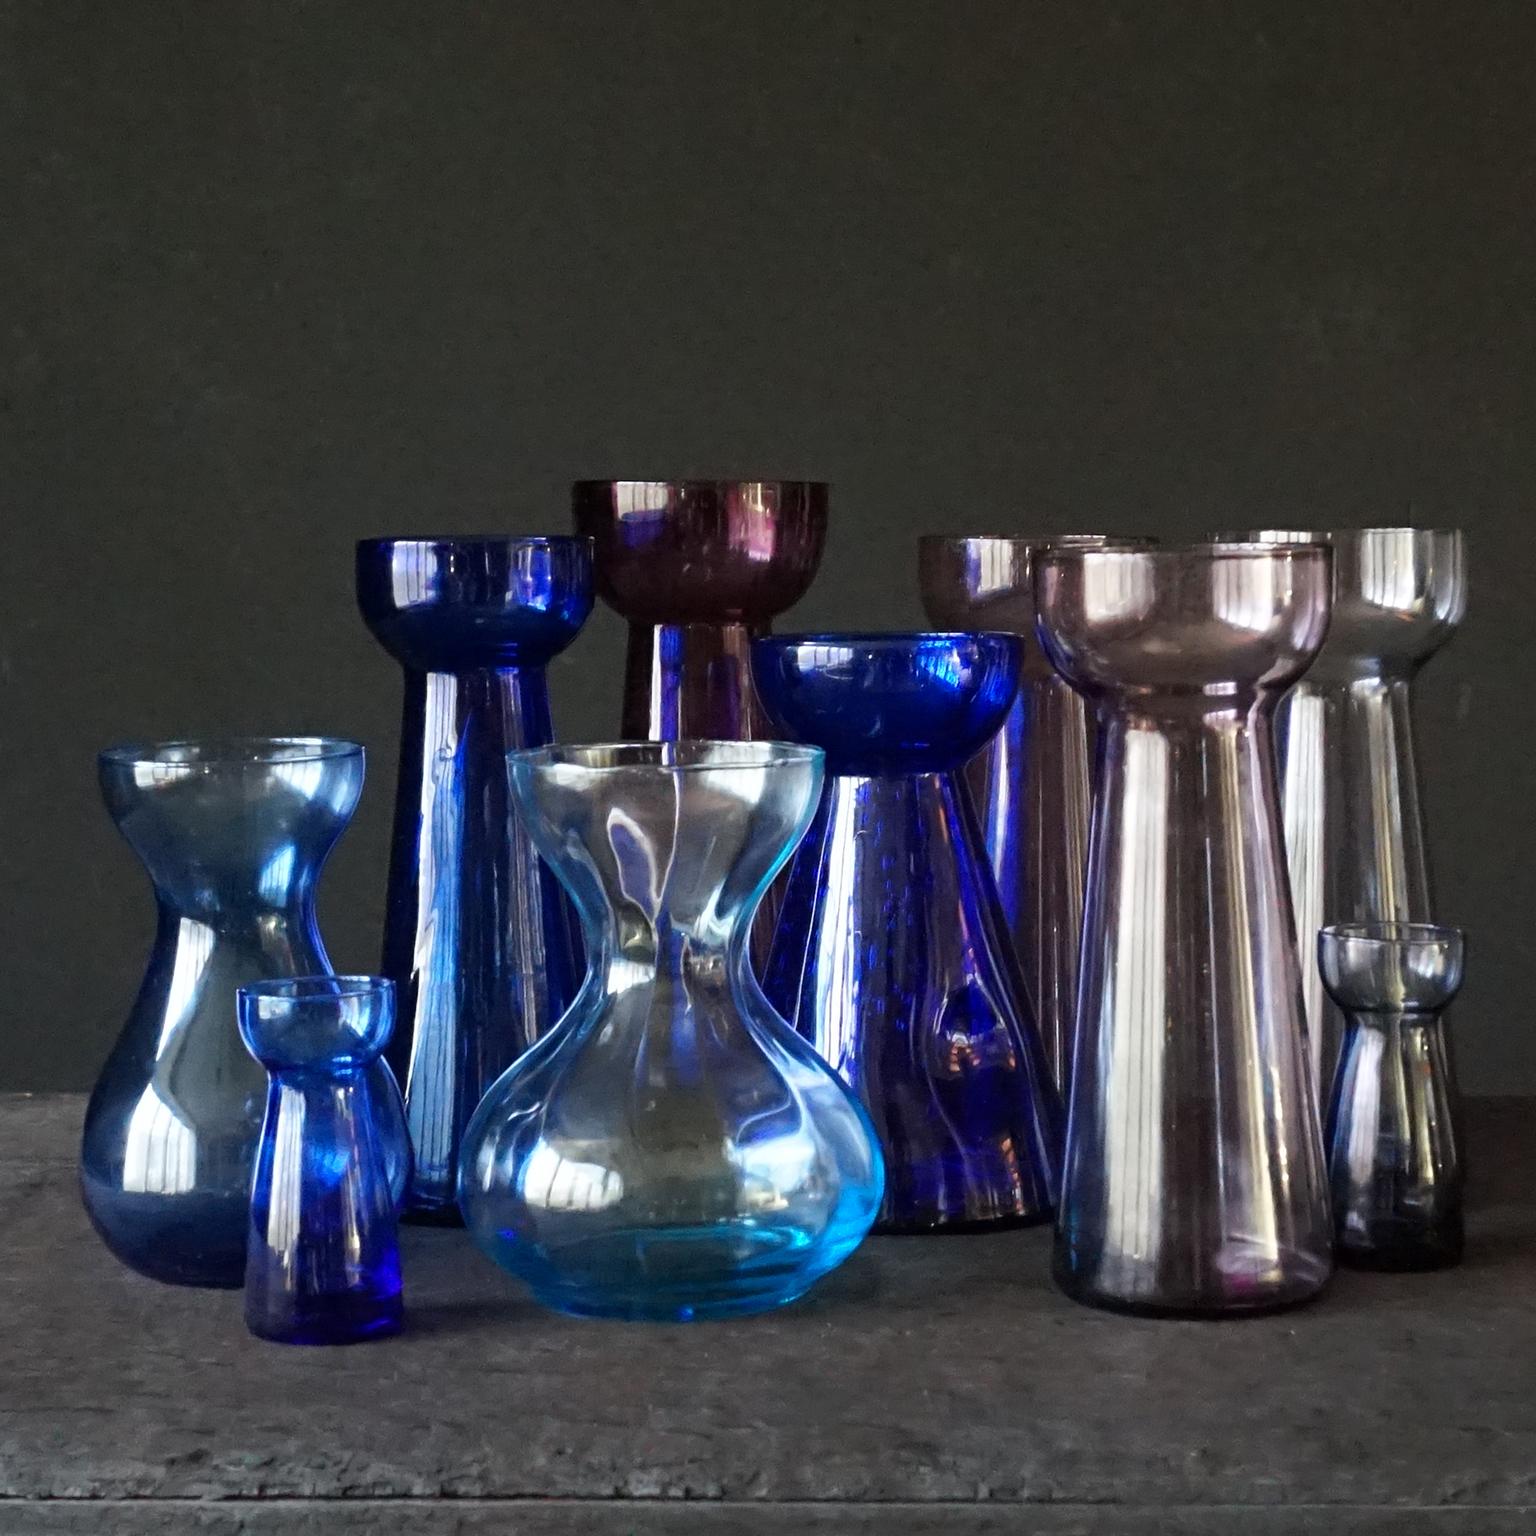 10 blue and violet flower bulb hyacinth, daffodil, tulip and crocus vases.
All clear hand blown glass in blue and purple tones by Royal Crystal Leerdam and by Rimac Baarn. 8 big ones and 2 small ones

Ribbed purple high glass by Rimac 22cm high, Ø